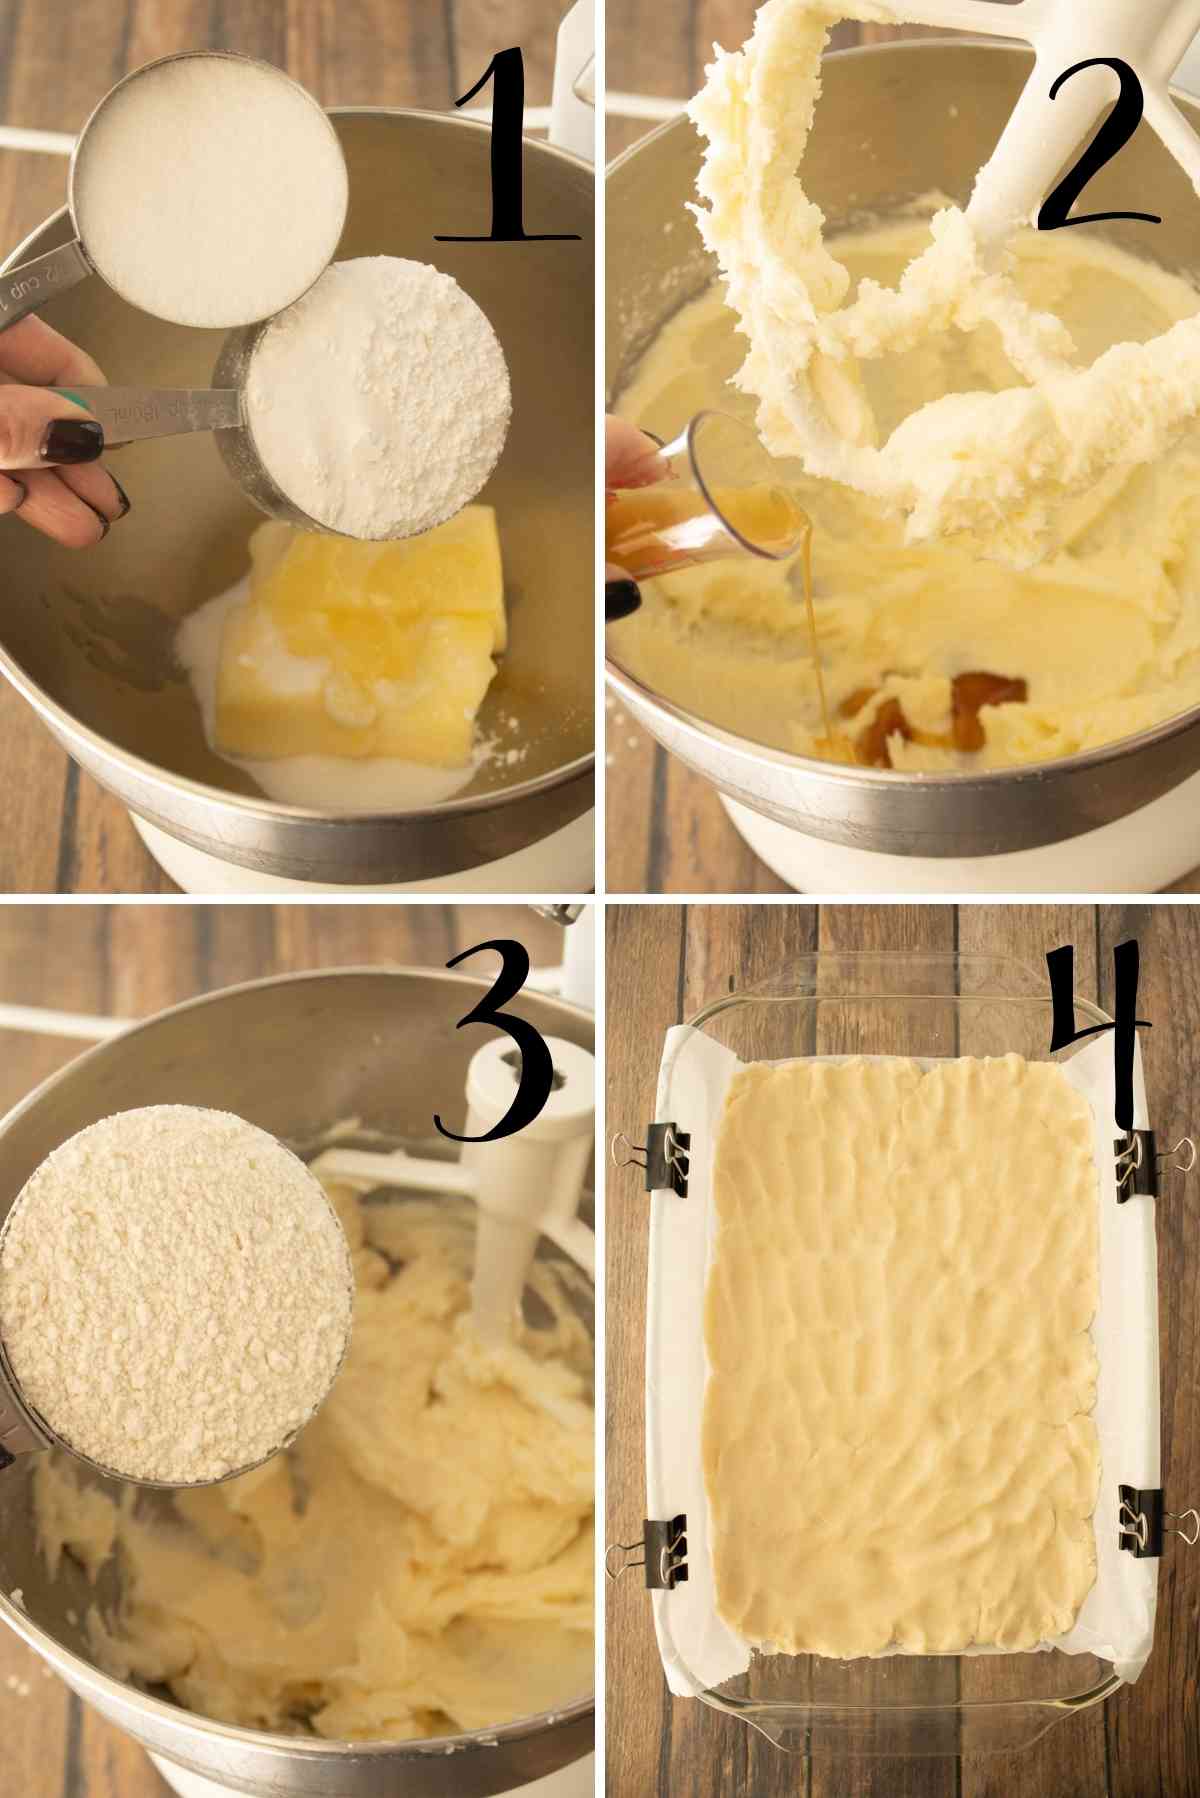 Make shortbread layer and press the cookie base into a baking dish.